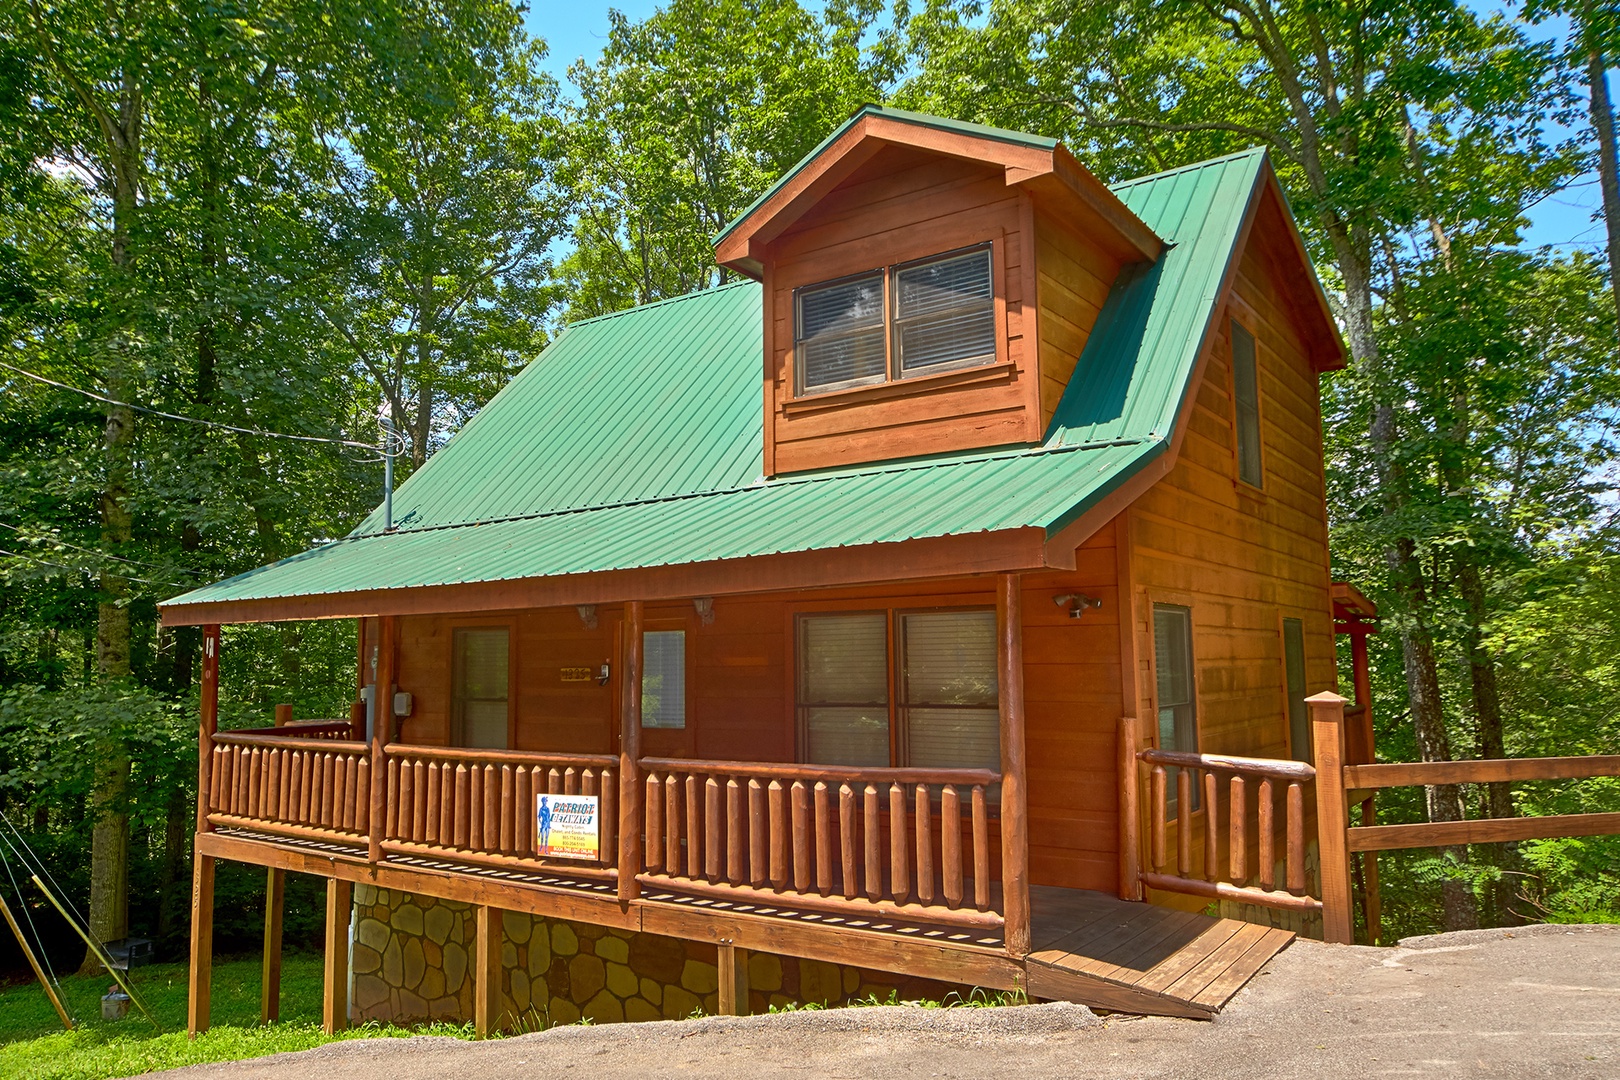 Looking back at Love Struck, a 1 bedroom cabin rental located in Pigeon Forge